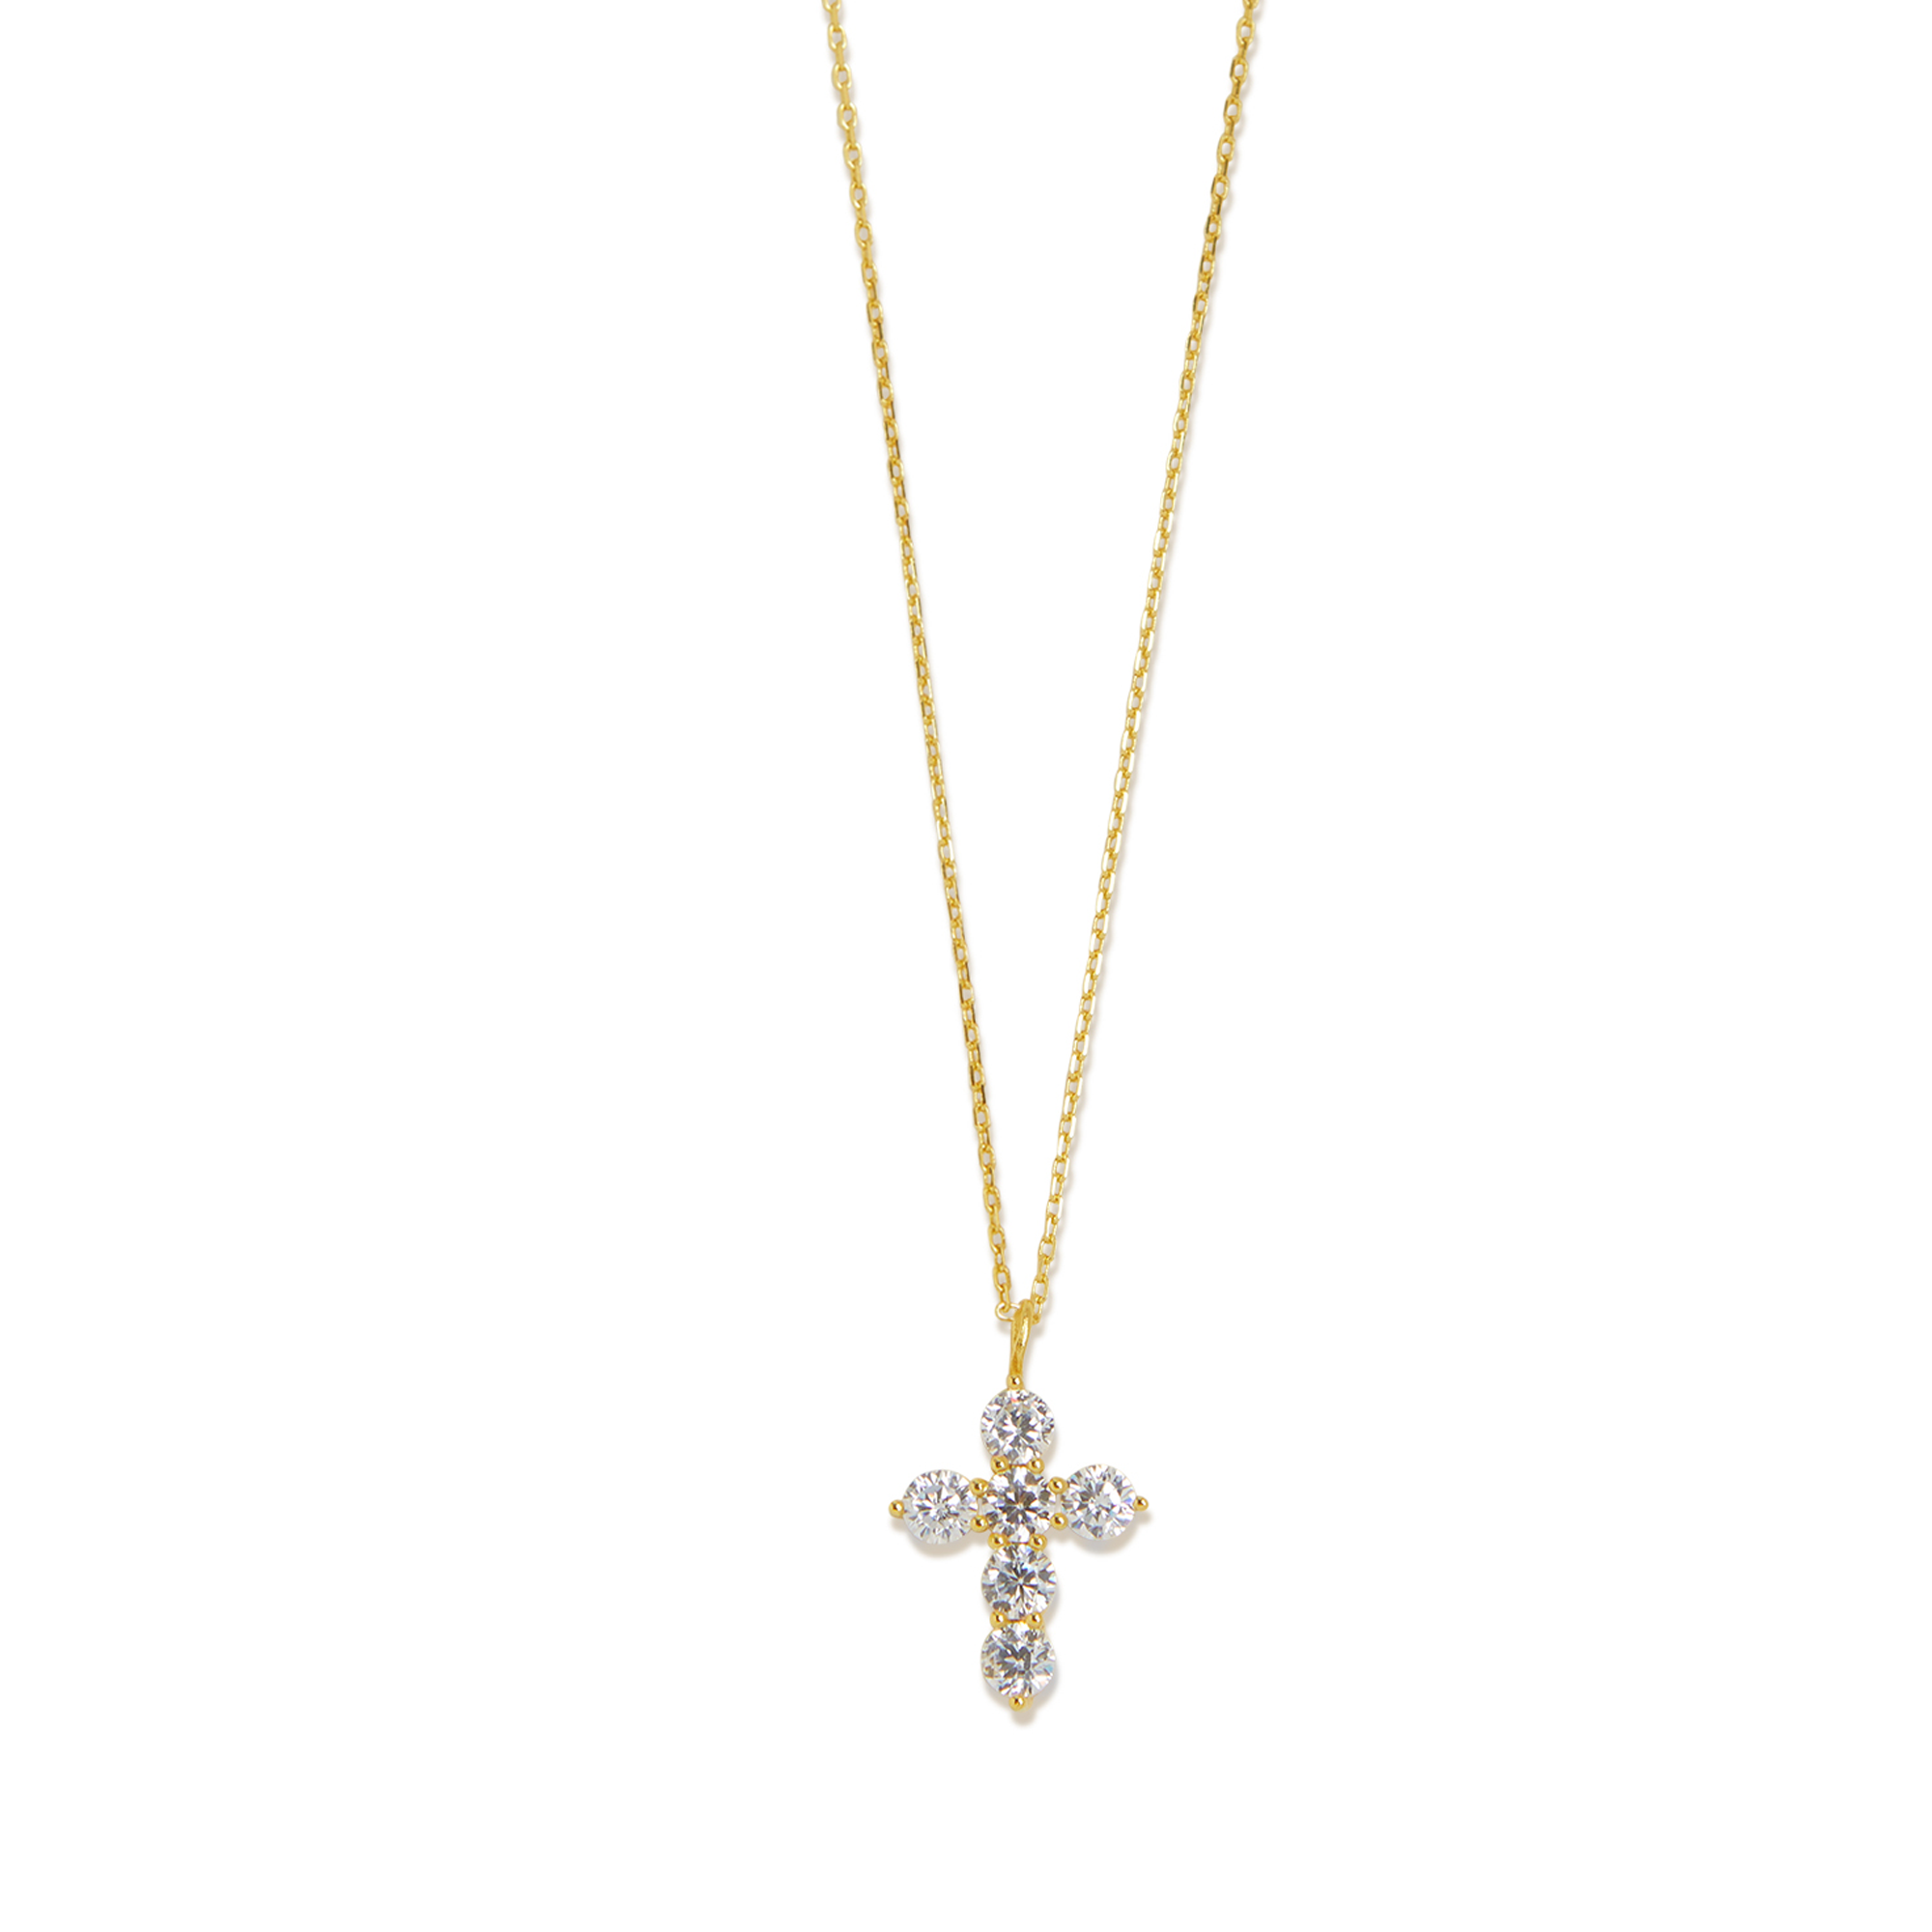 THE CZ CROSS NECKLACE